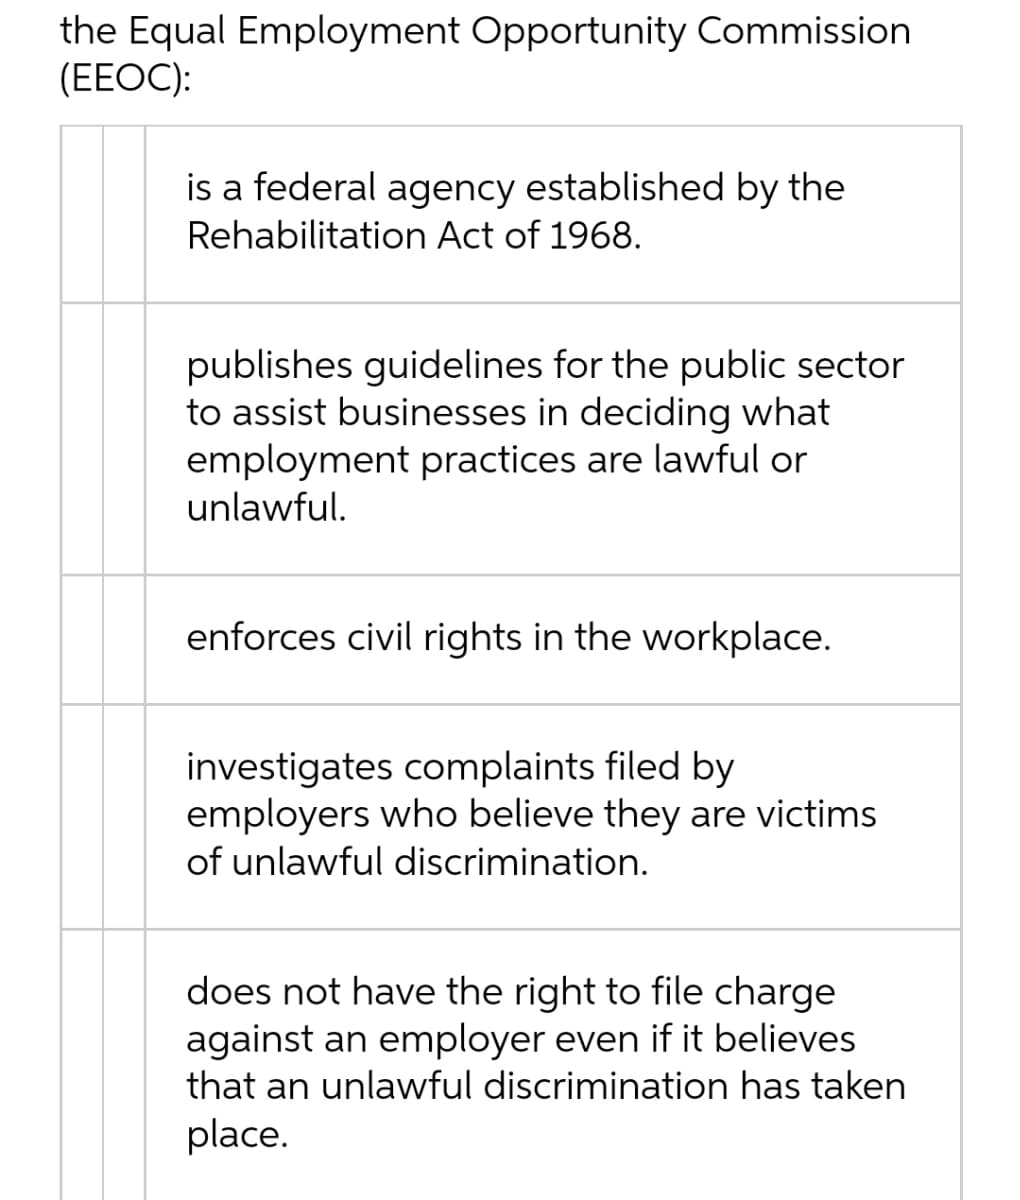 the Equal Employment Opportunity Commission
(EEOC):
is a federal agency established by the
Rehabilitation Act of 1968.
publishes guidelines for the public sector
to assist businesses in deciding what
employment practices are lawful or
unlawful.
enforces civil rights in the workplace.
investigates complaints filed by
employers who believe they are victims
of unlawful discrimination.
does not have the right to file charge
against an employer even if it believes
that an unlawful discrimination has taken
place.
